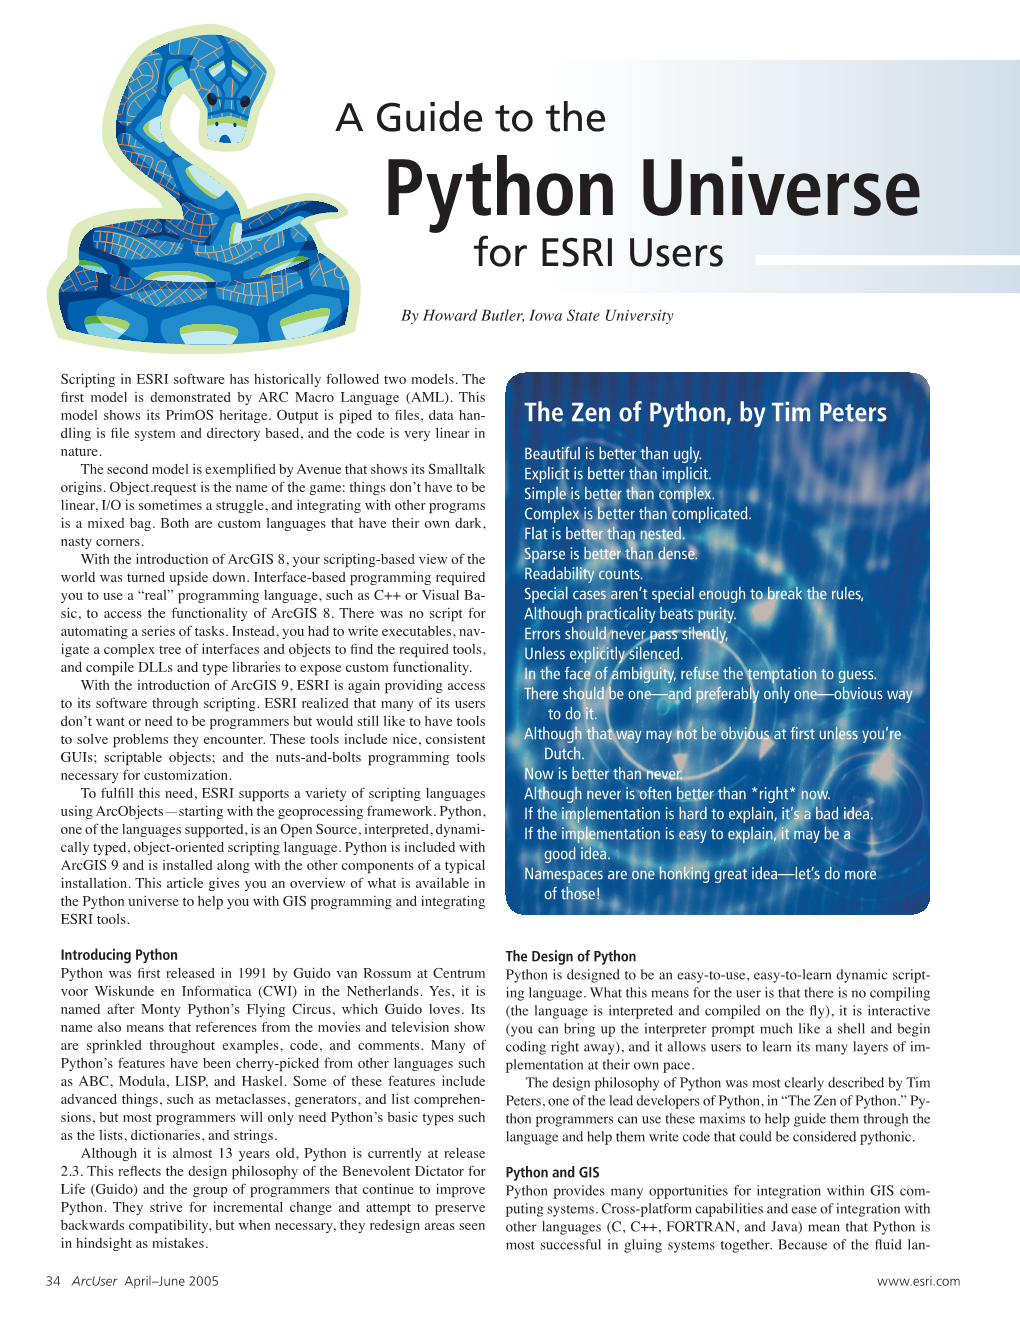 A Guide to the Python Universe for ESRI Users